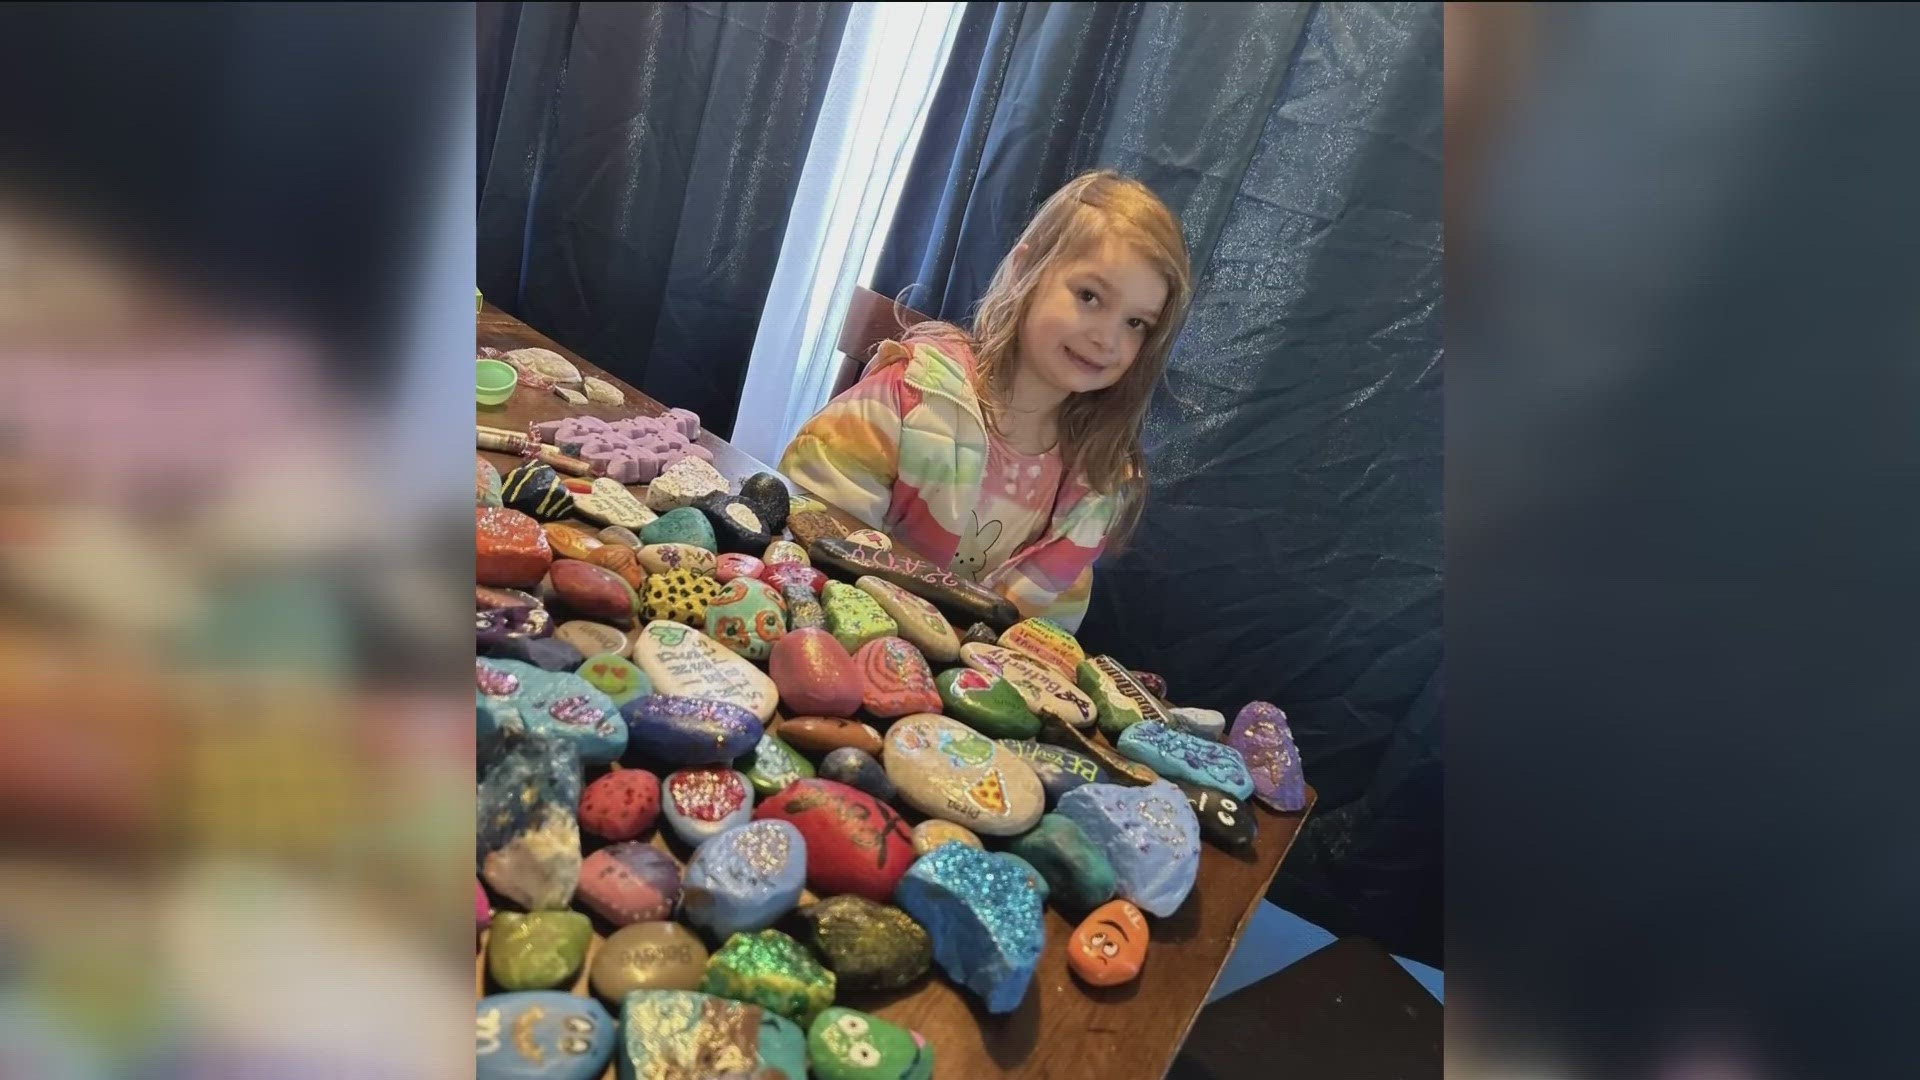 Kady Sesco's mom knew her daughter wasn't interested in Easter eggs, so asked the community to drop off decorated rocks instead.